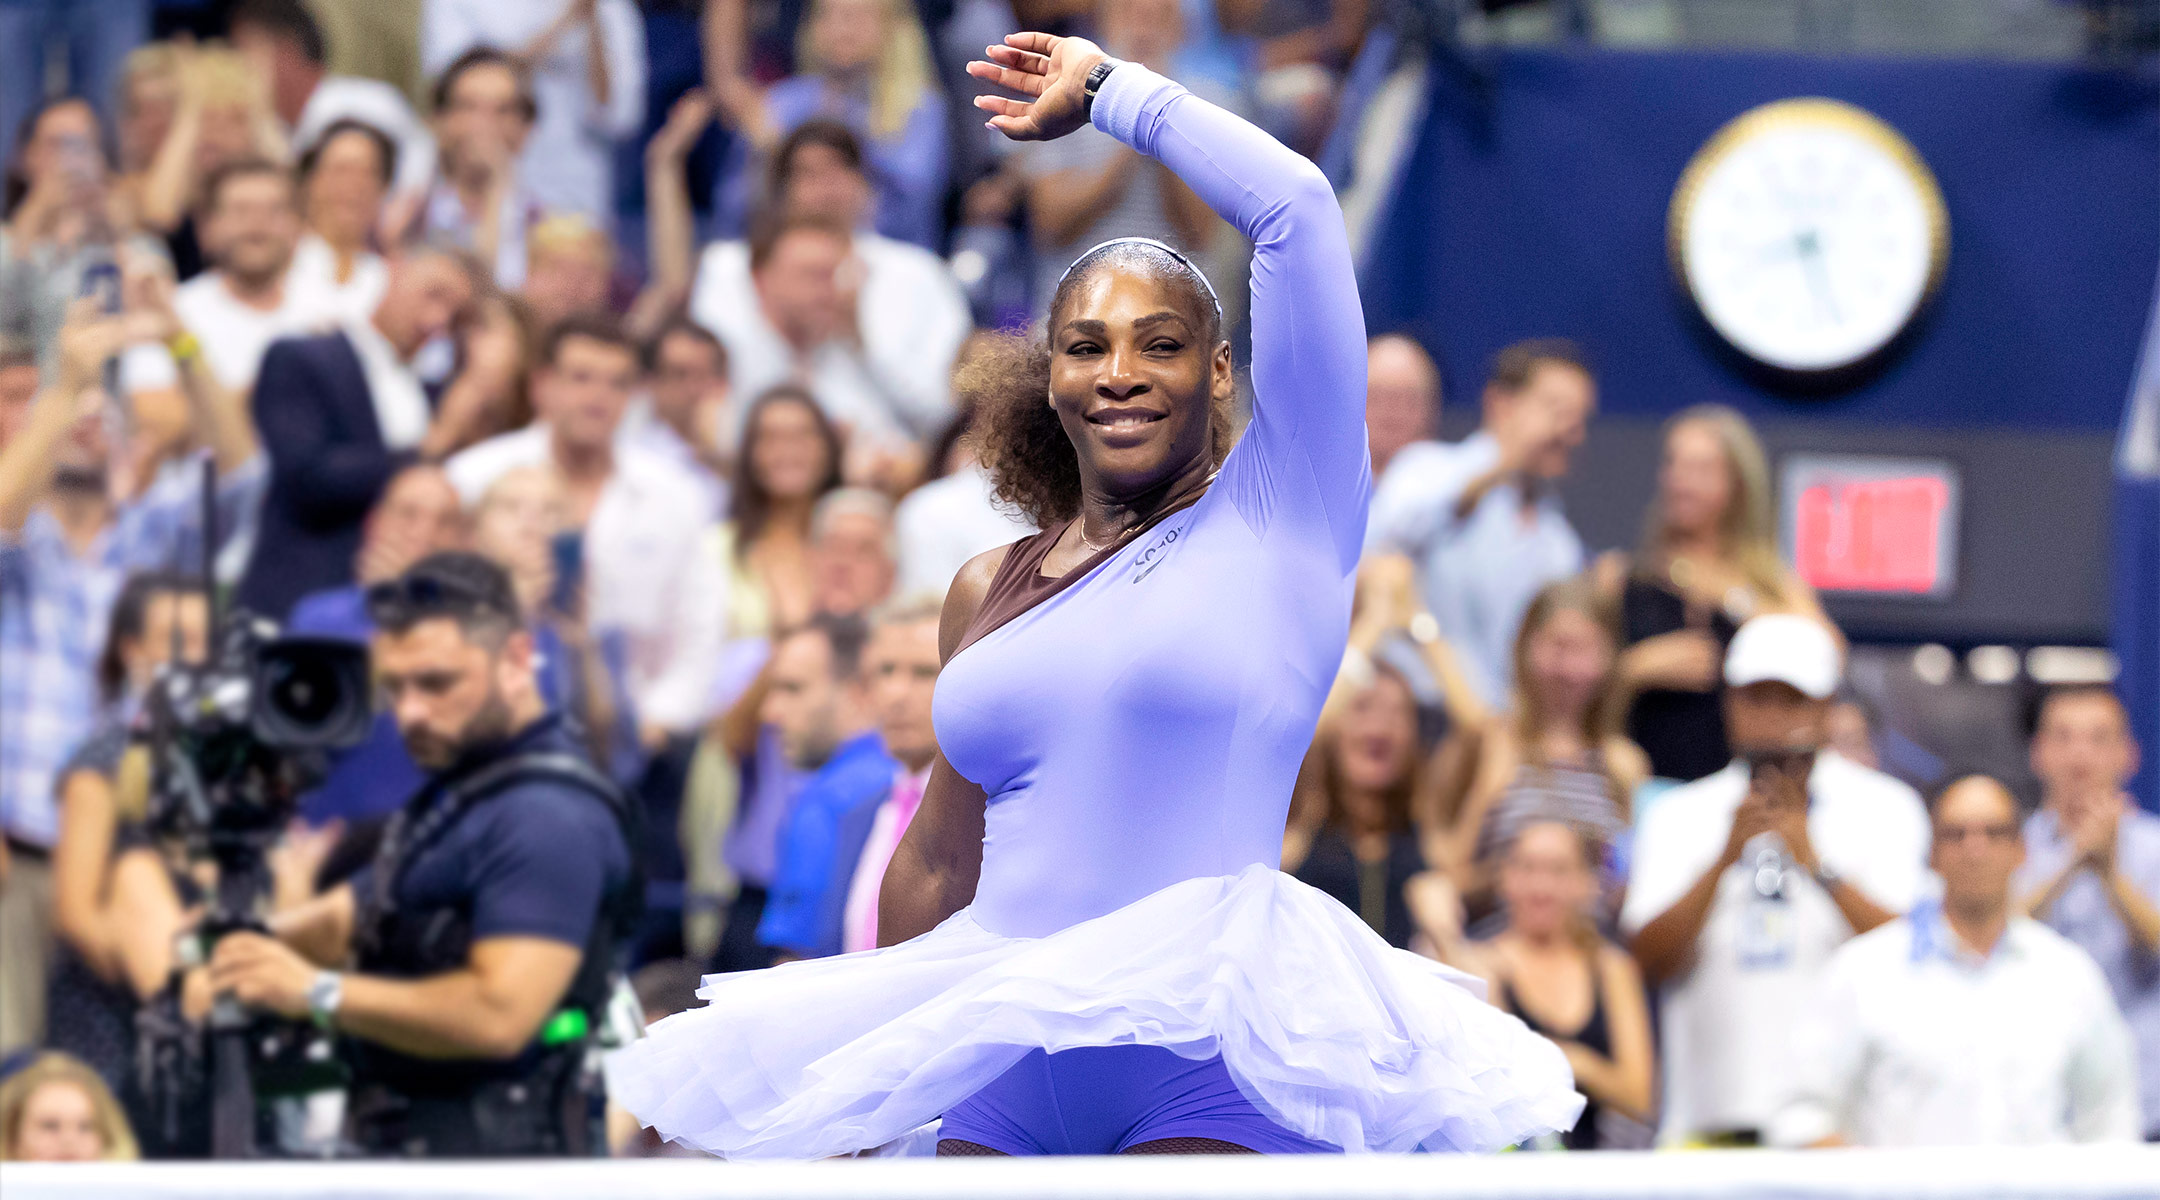 serena williams comments about her living room turning into a playroom.